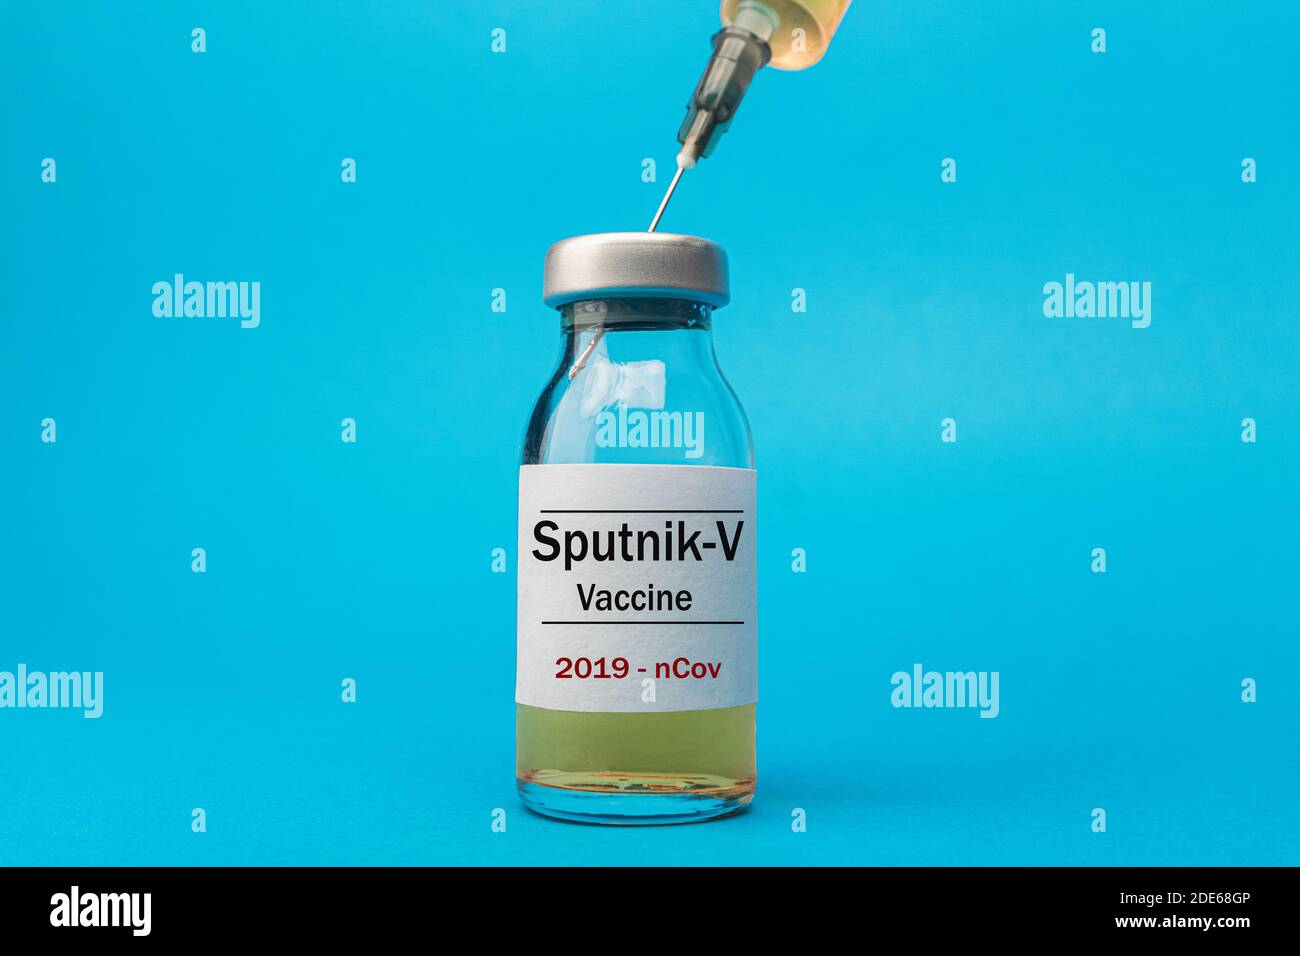 Coronavirus vaccine concept and background. New vaccine sputnik-v isolated on blue background. Covid-19, 2019-nCov pandemic. Stock Photo